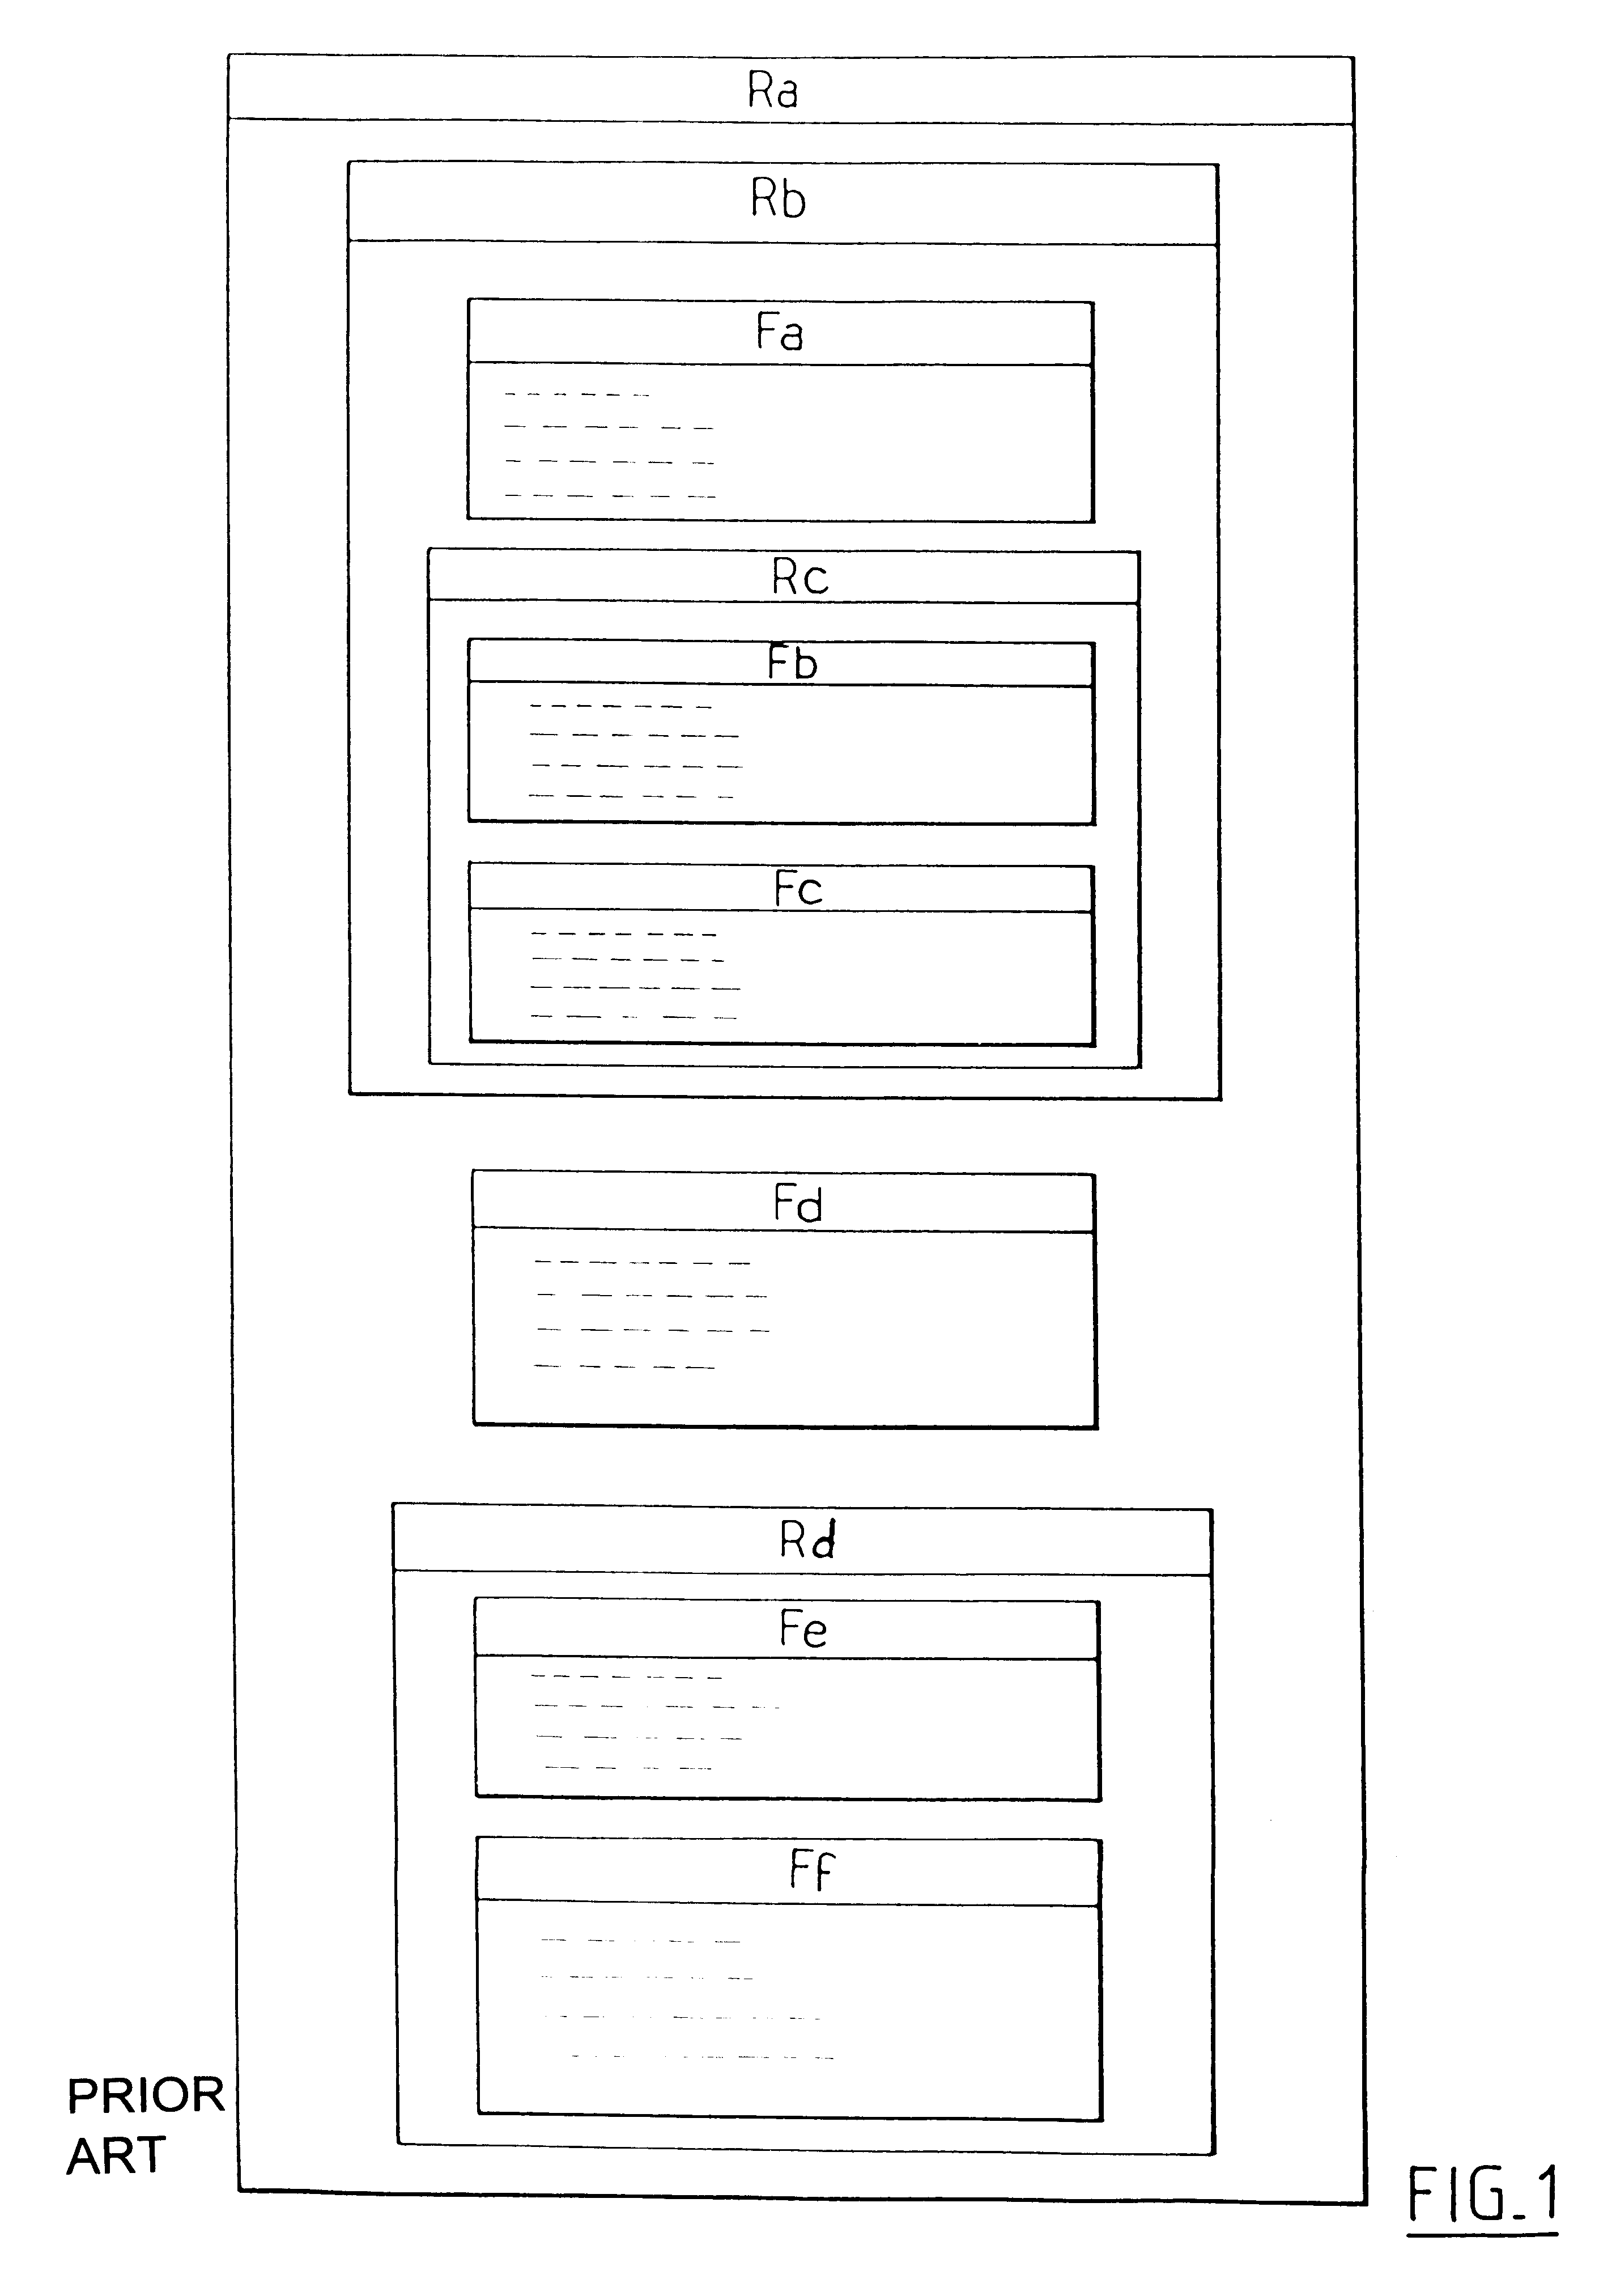 Integrated circuit card comprising files classified in a tree structure